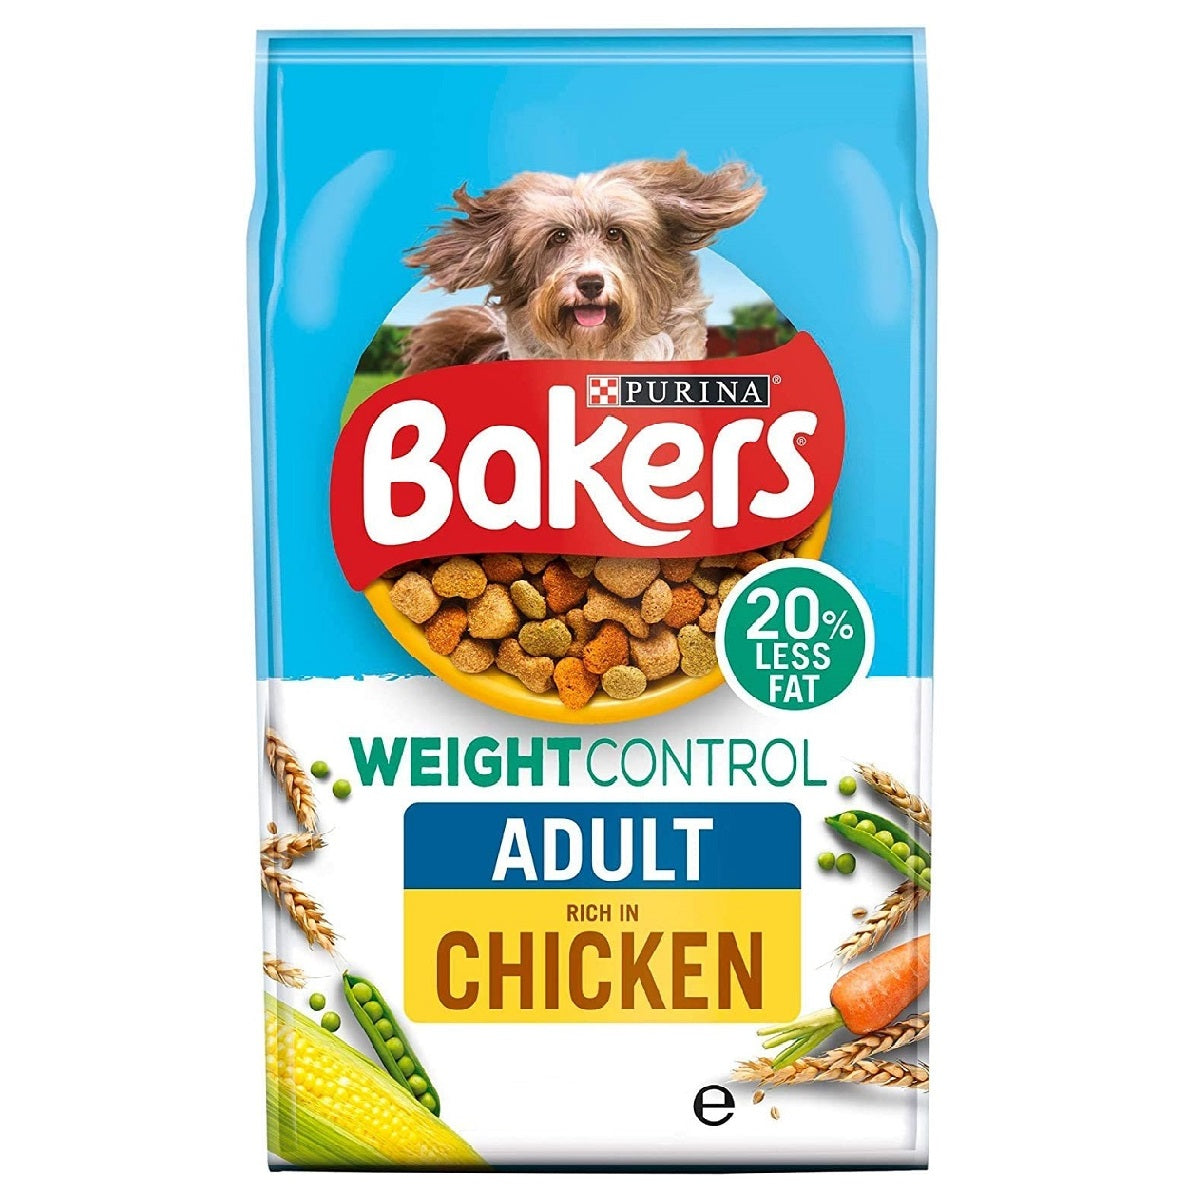 Bakers - Weight Control